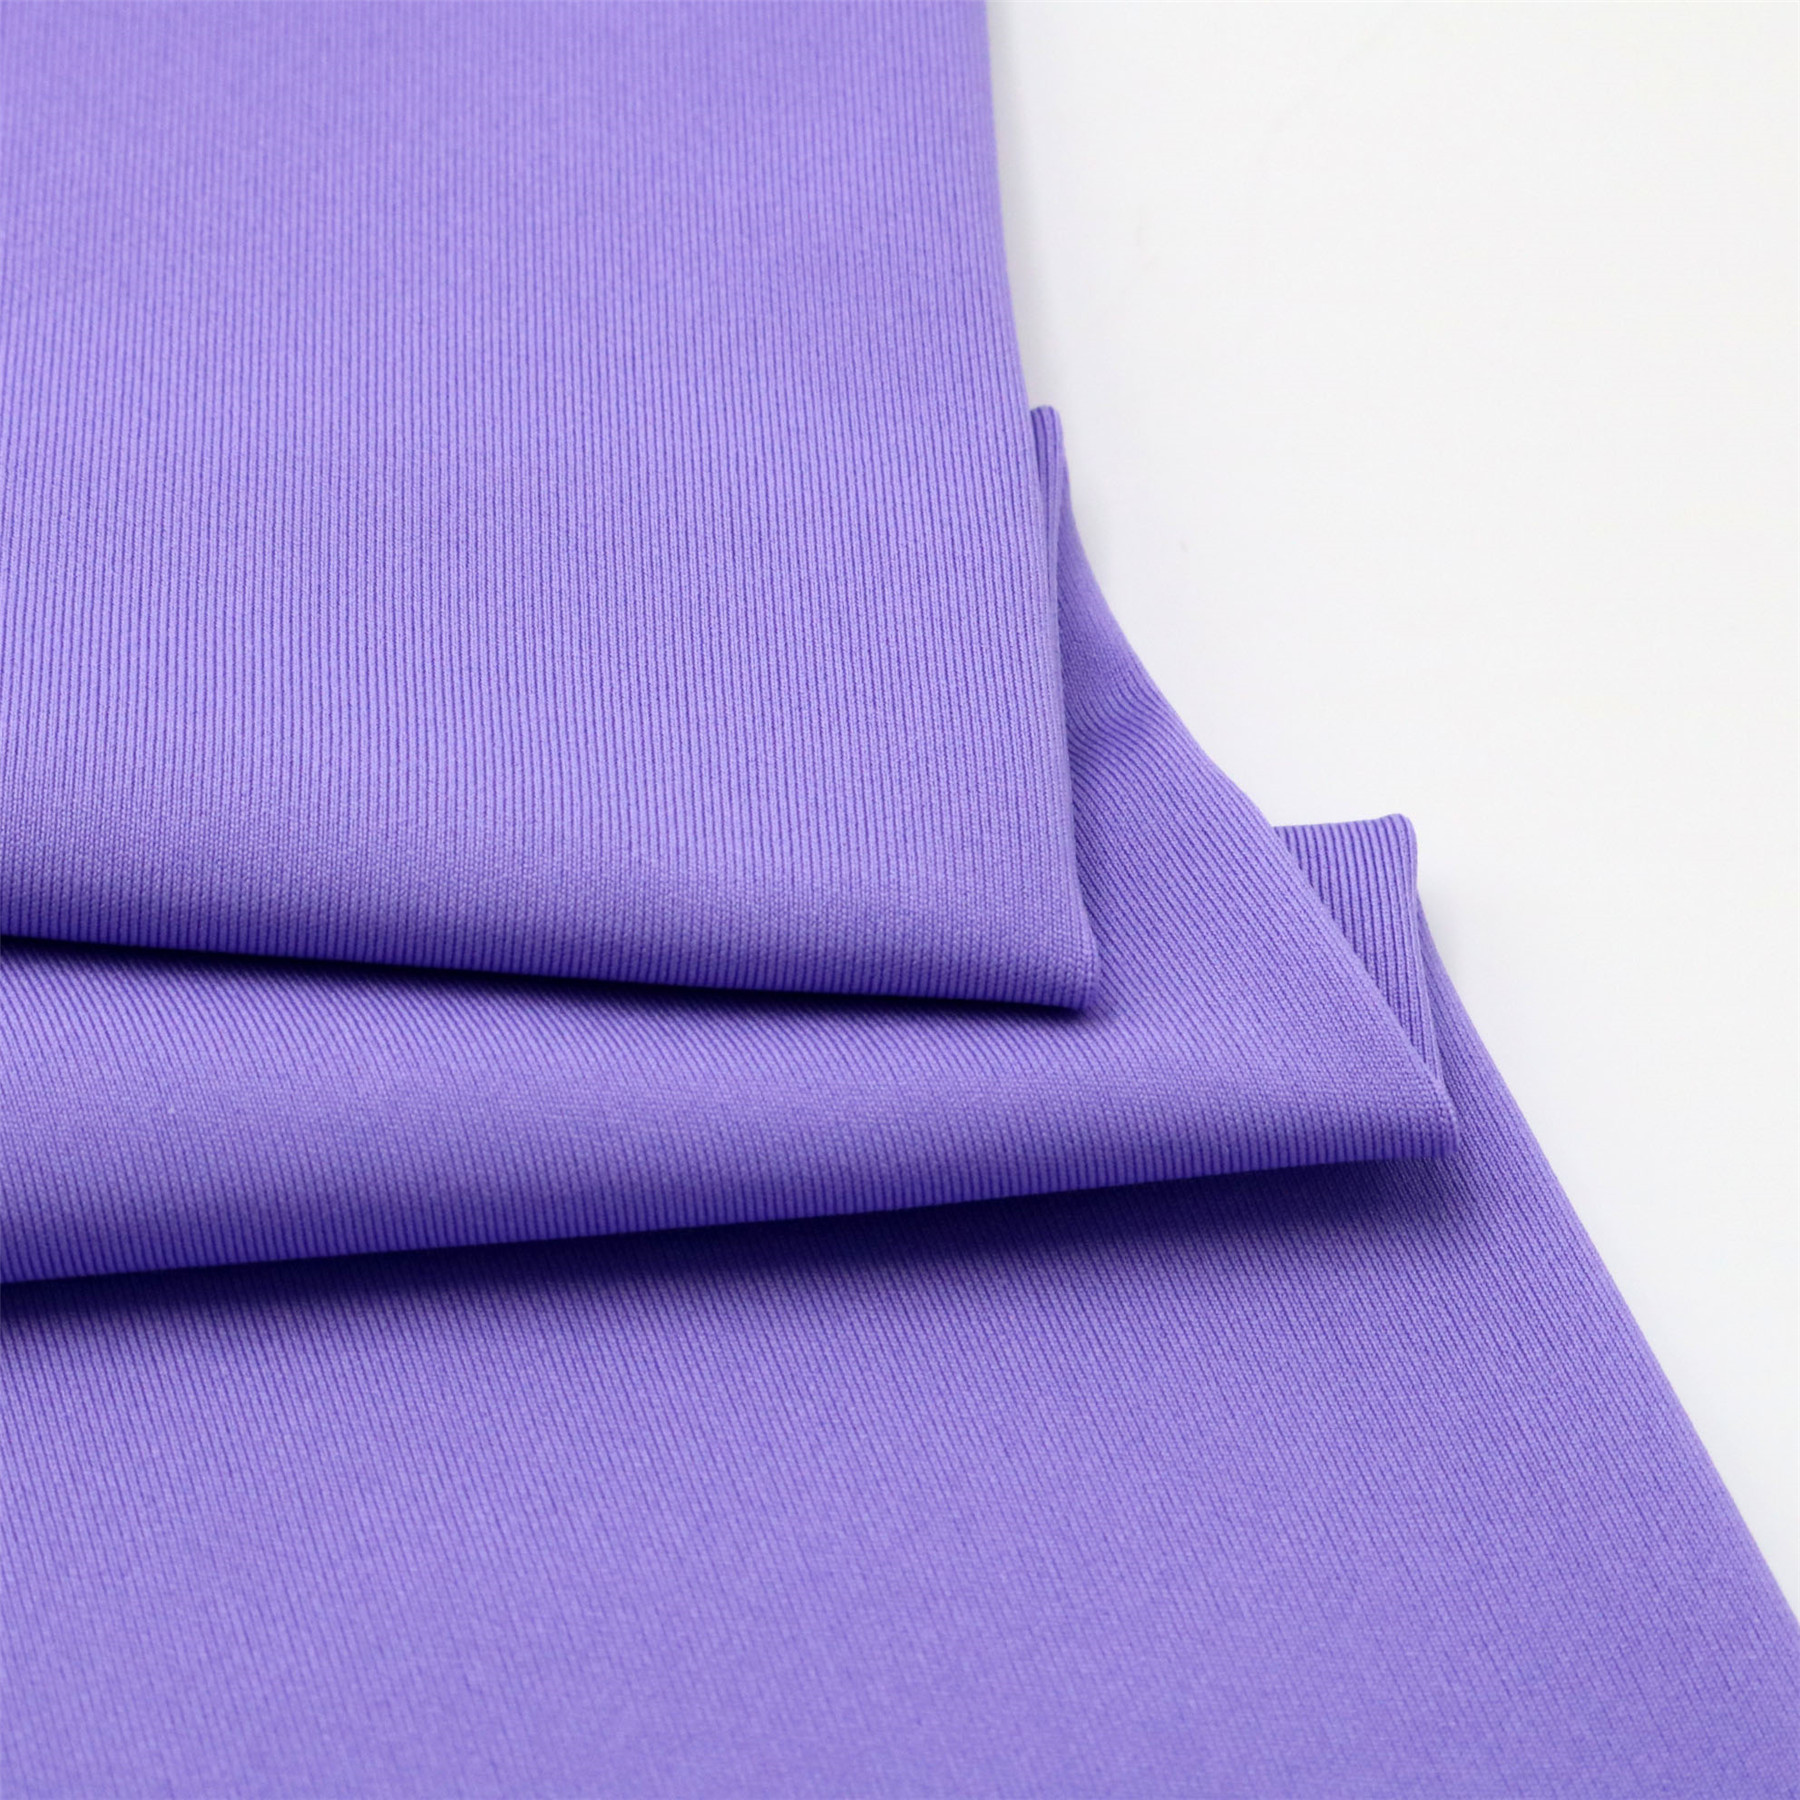 83%Recycle Polyester 17%Spandex Interlock Double Knit Fabric Recycled ...